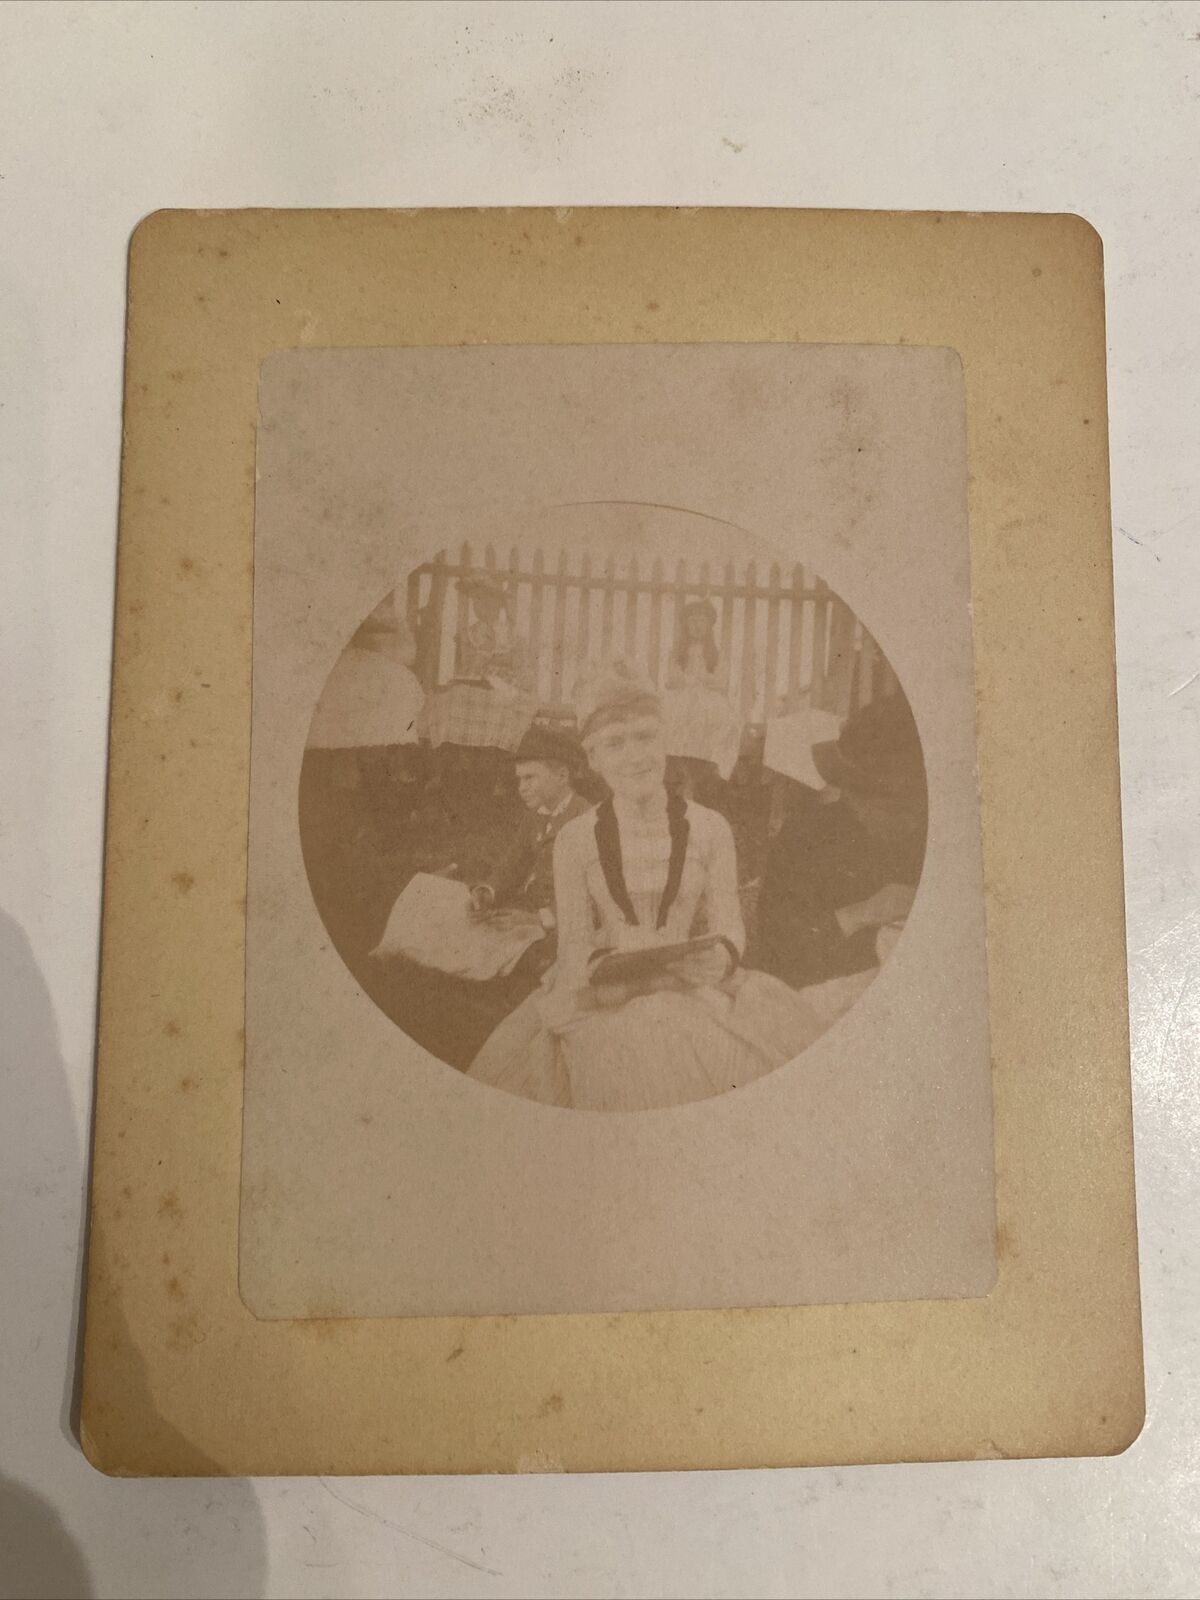 Vintage Kodak No 1 Round Photograph 1890's Woman In Hat Boy Outside Fence Faded